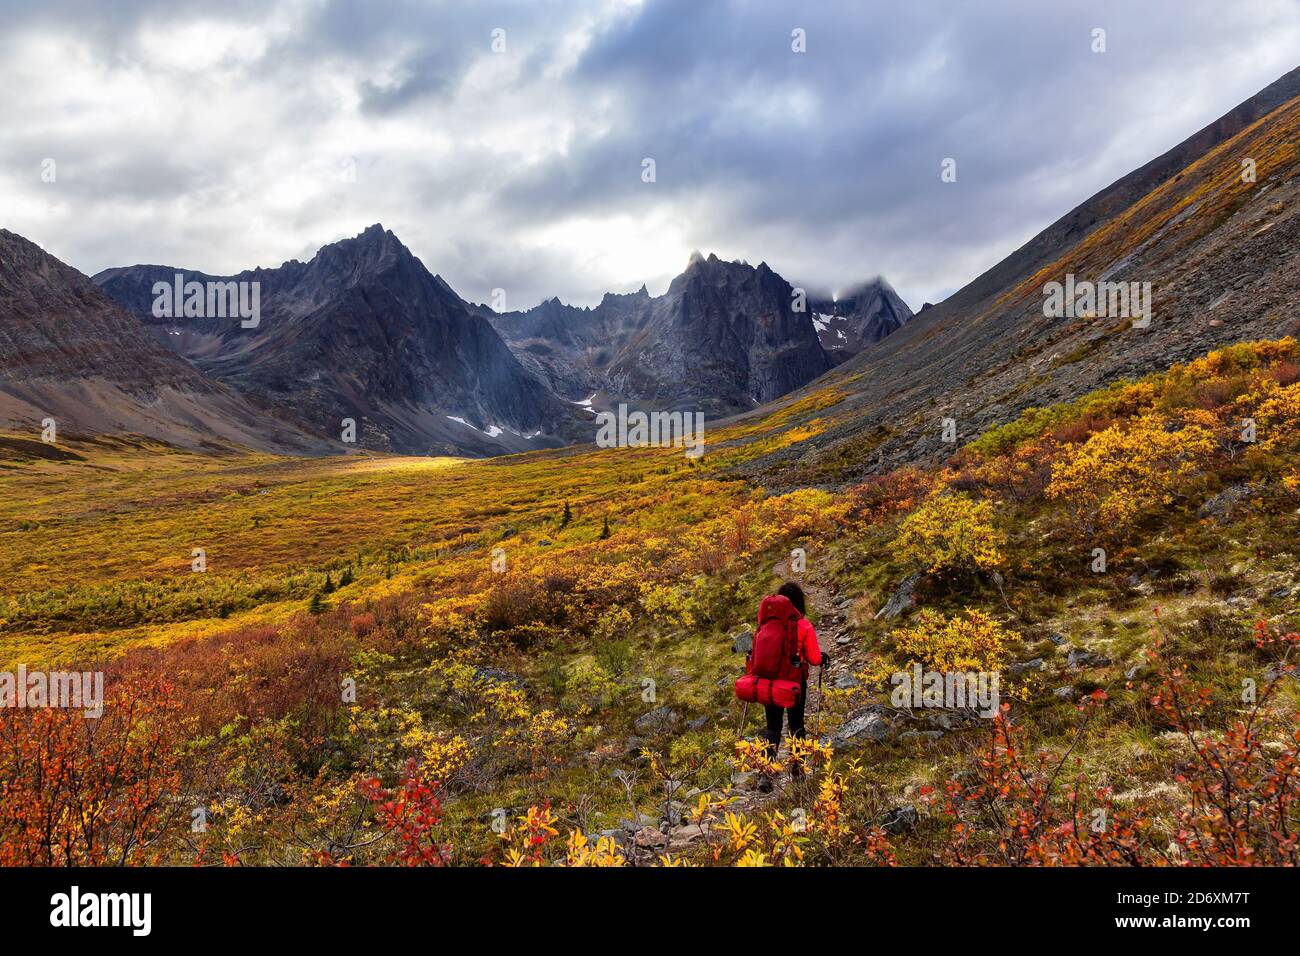 Woman Backpacking auf Scenic Rocky Hiking Trail Stockfoto